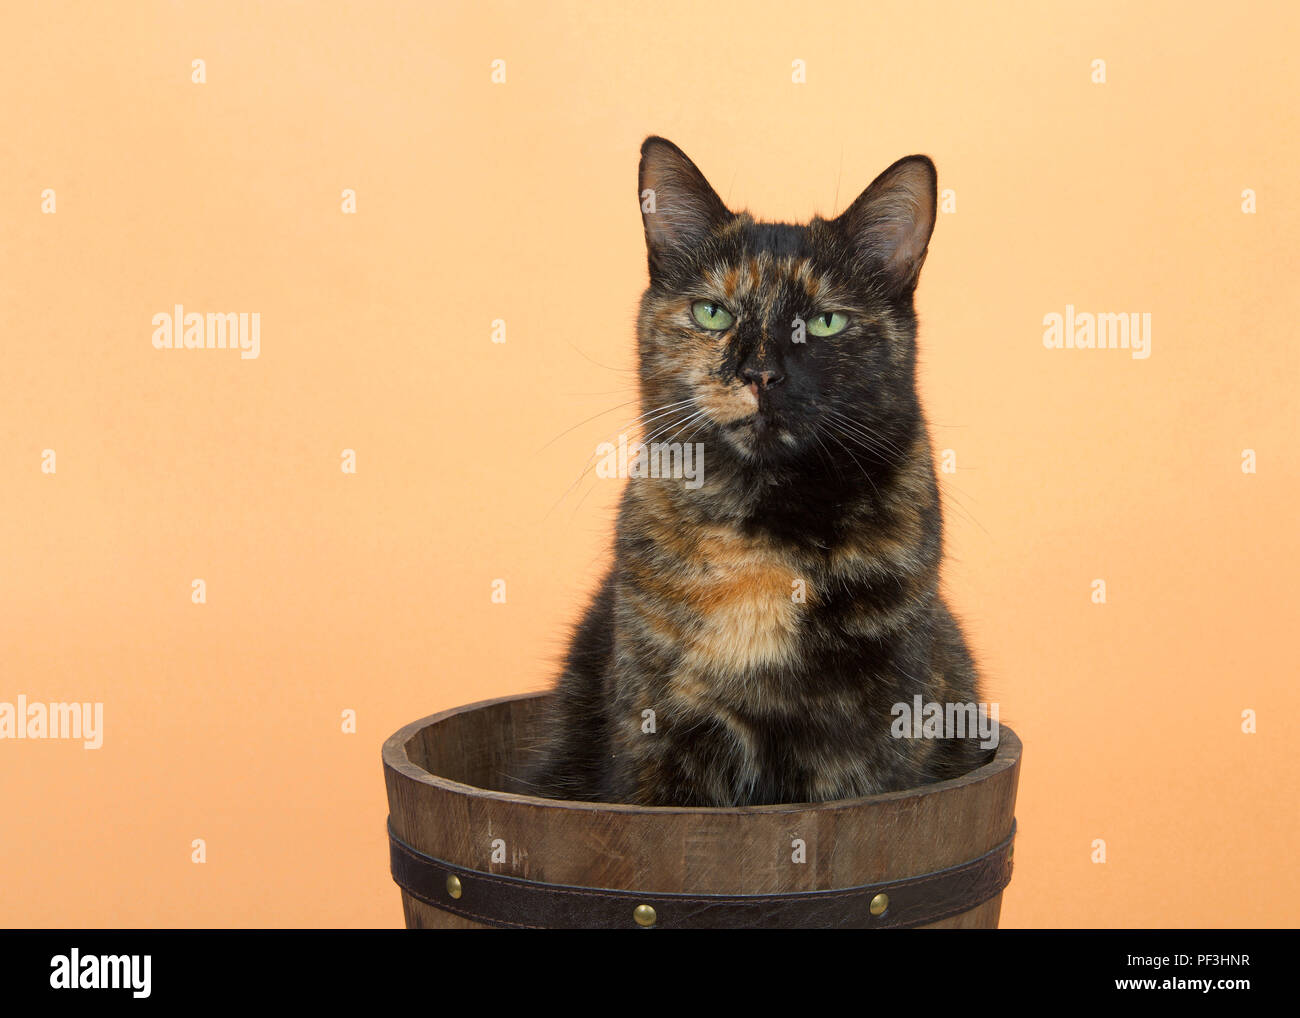 Portrait of one tortie torbie tabby cat on an orange background sitting in a wooden bucket. Looking directly at viewer with skeptical expression. Copy Stock Photo